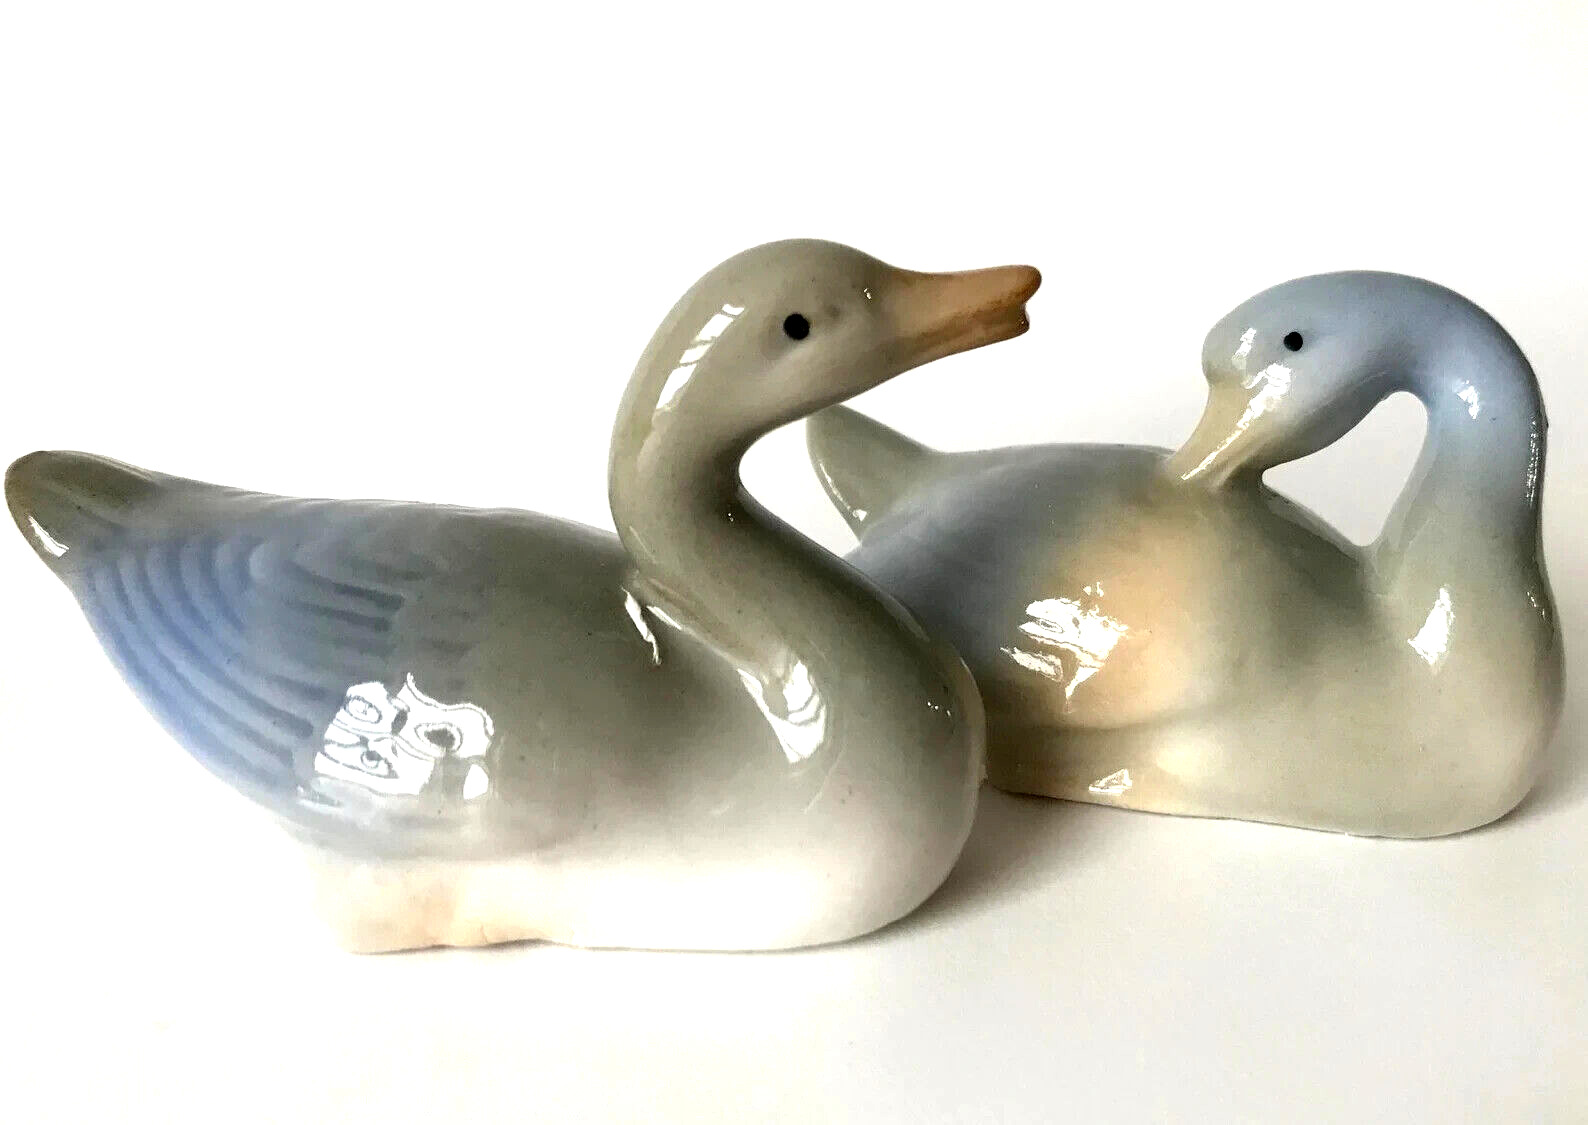 Geese Figurines Porcelain VTG. 1960's Rare Set Of 2 Muted Blue & Gray color RARE